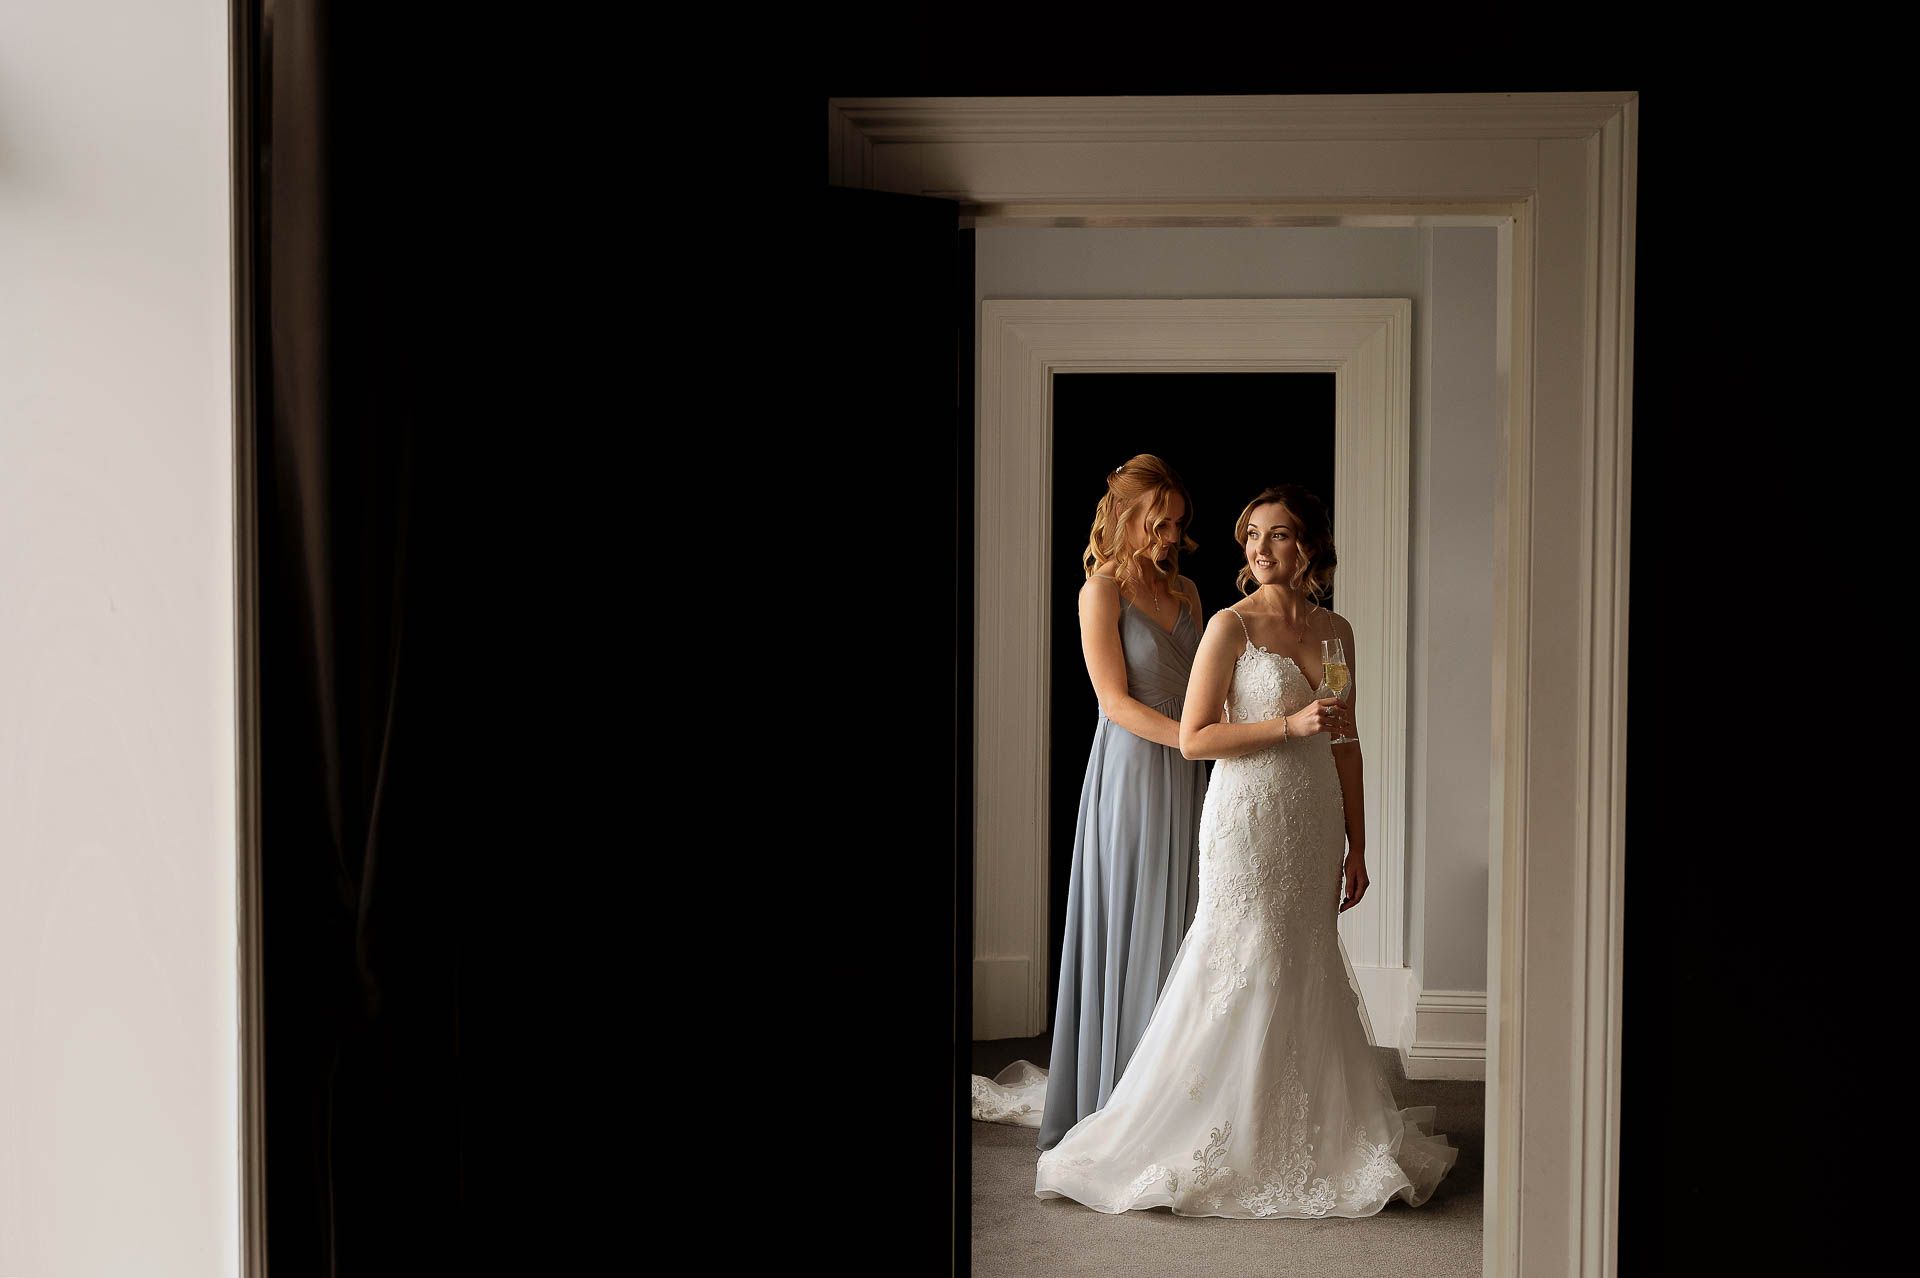 Sophie's bridesmaid helping secure Sophie's wedding dress. The two of them are stood in the doorway of the wedding suite at Swynford Manor, Sophie is holding a glass of Champagne and looking across the room. Photography by Fountain Photography. Videography by Veiled Productions.